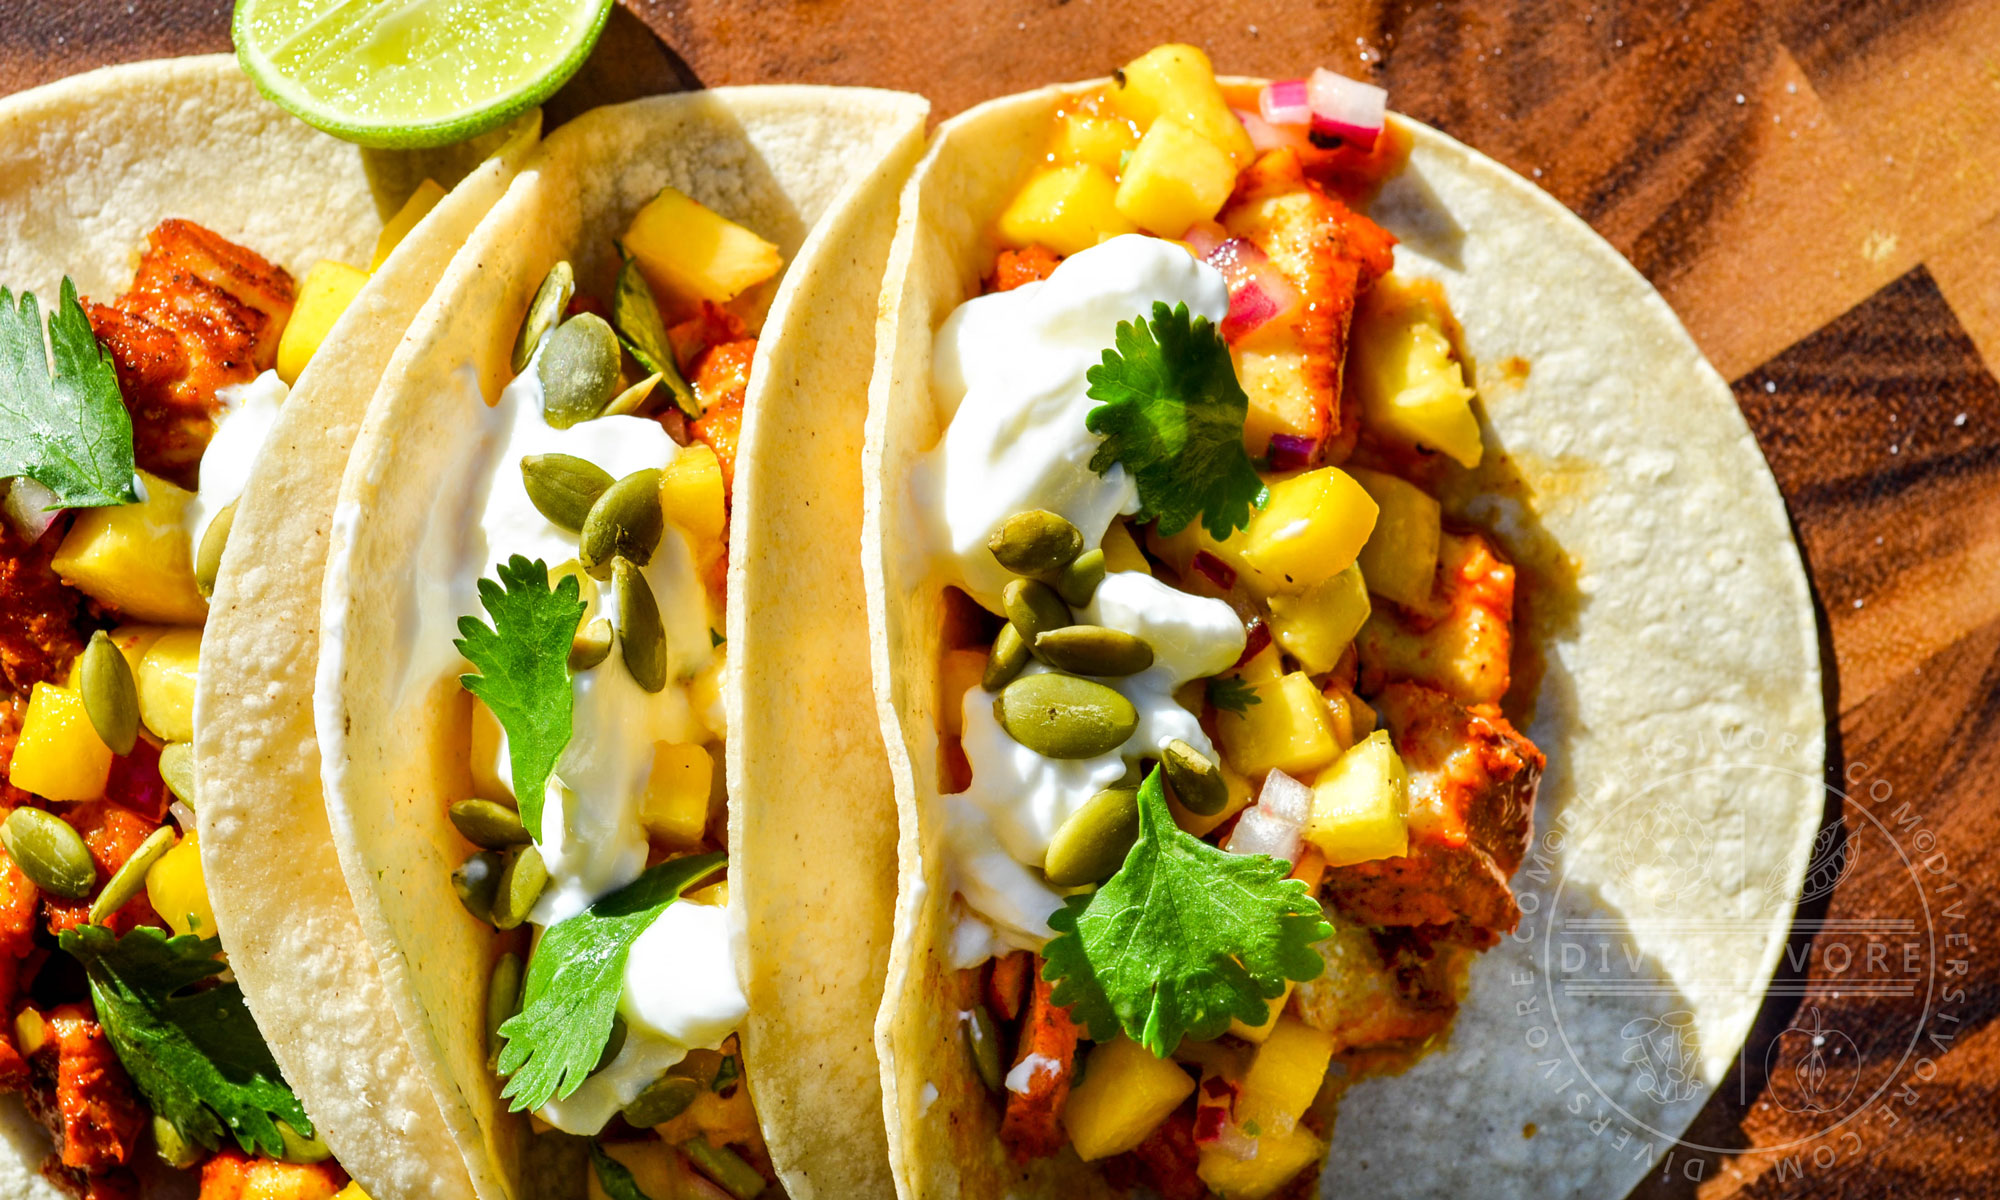 Yucatecan Fish Tacos with peach salsa, sour cream, and pumpkin seeds